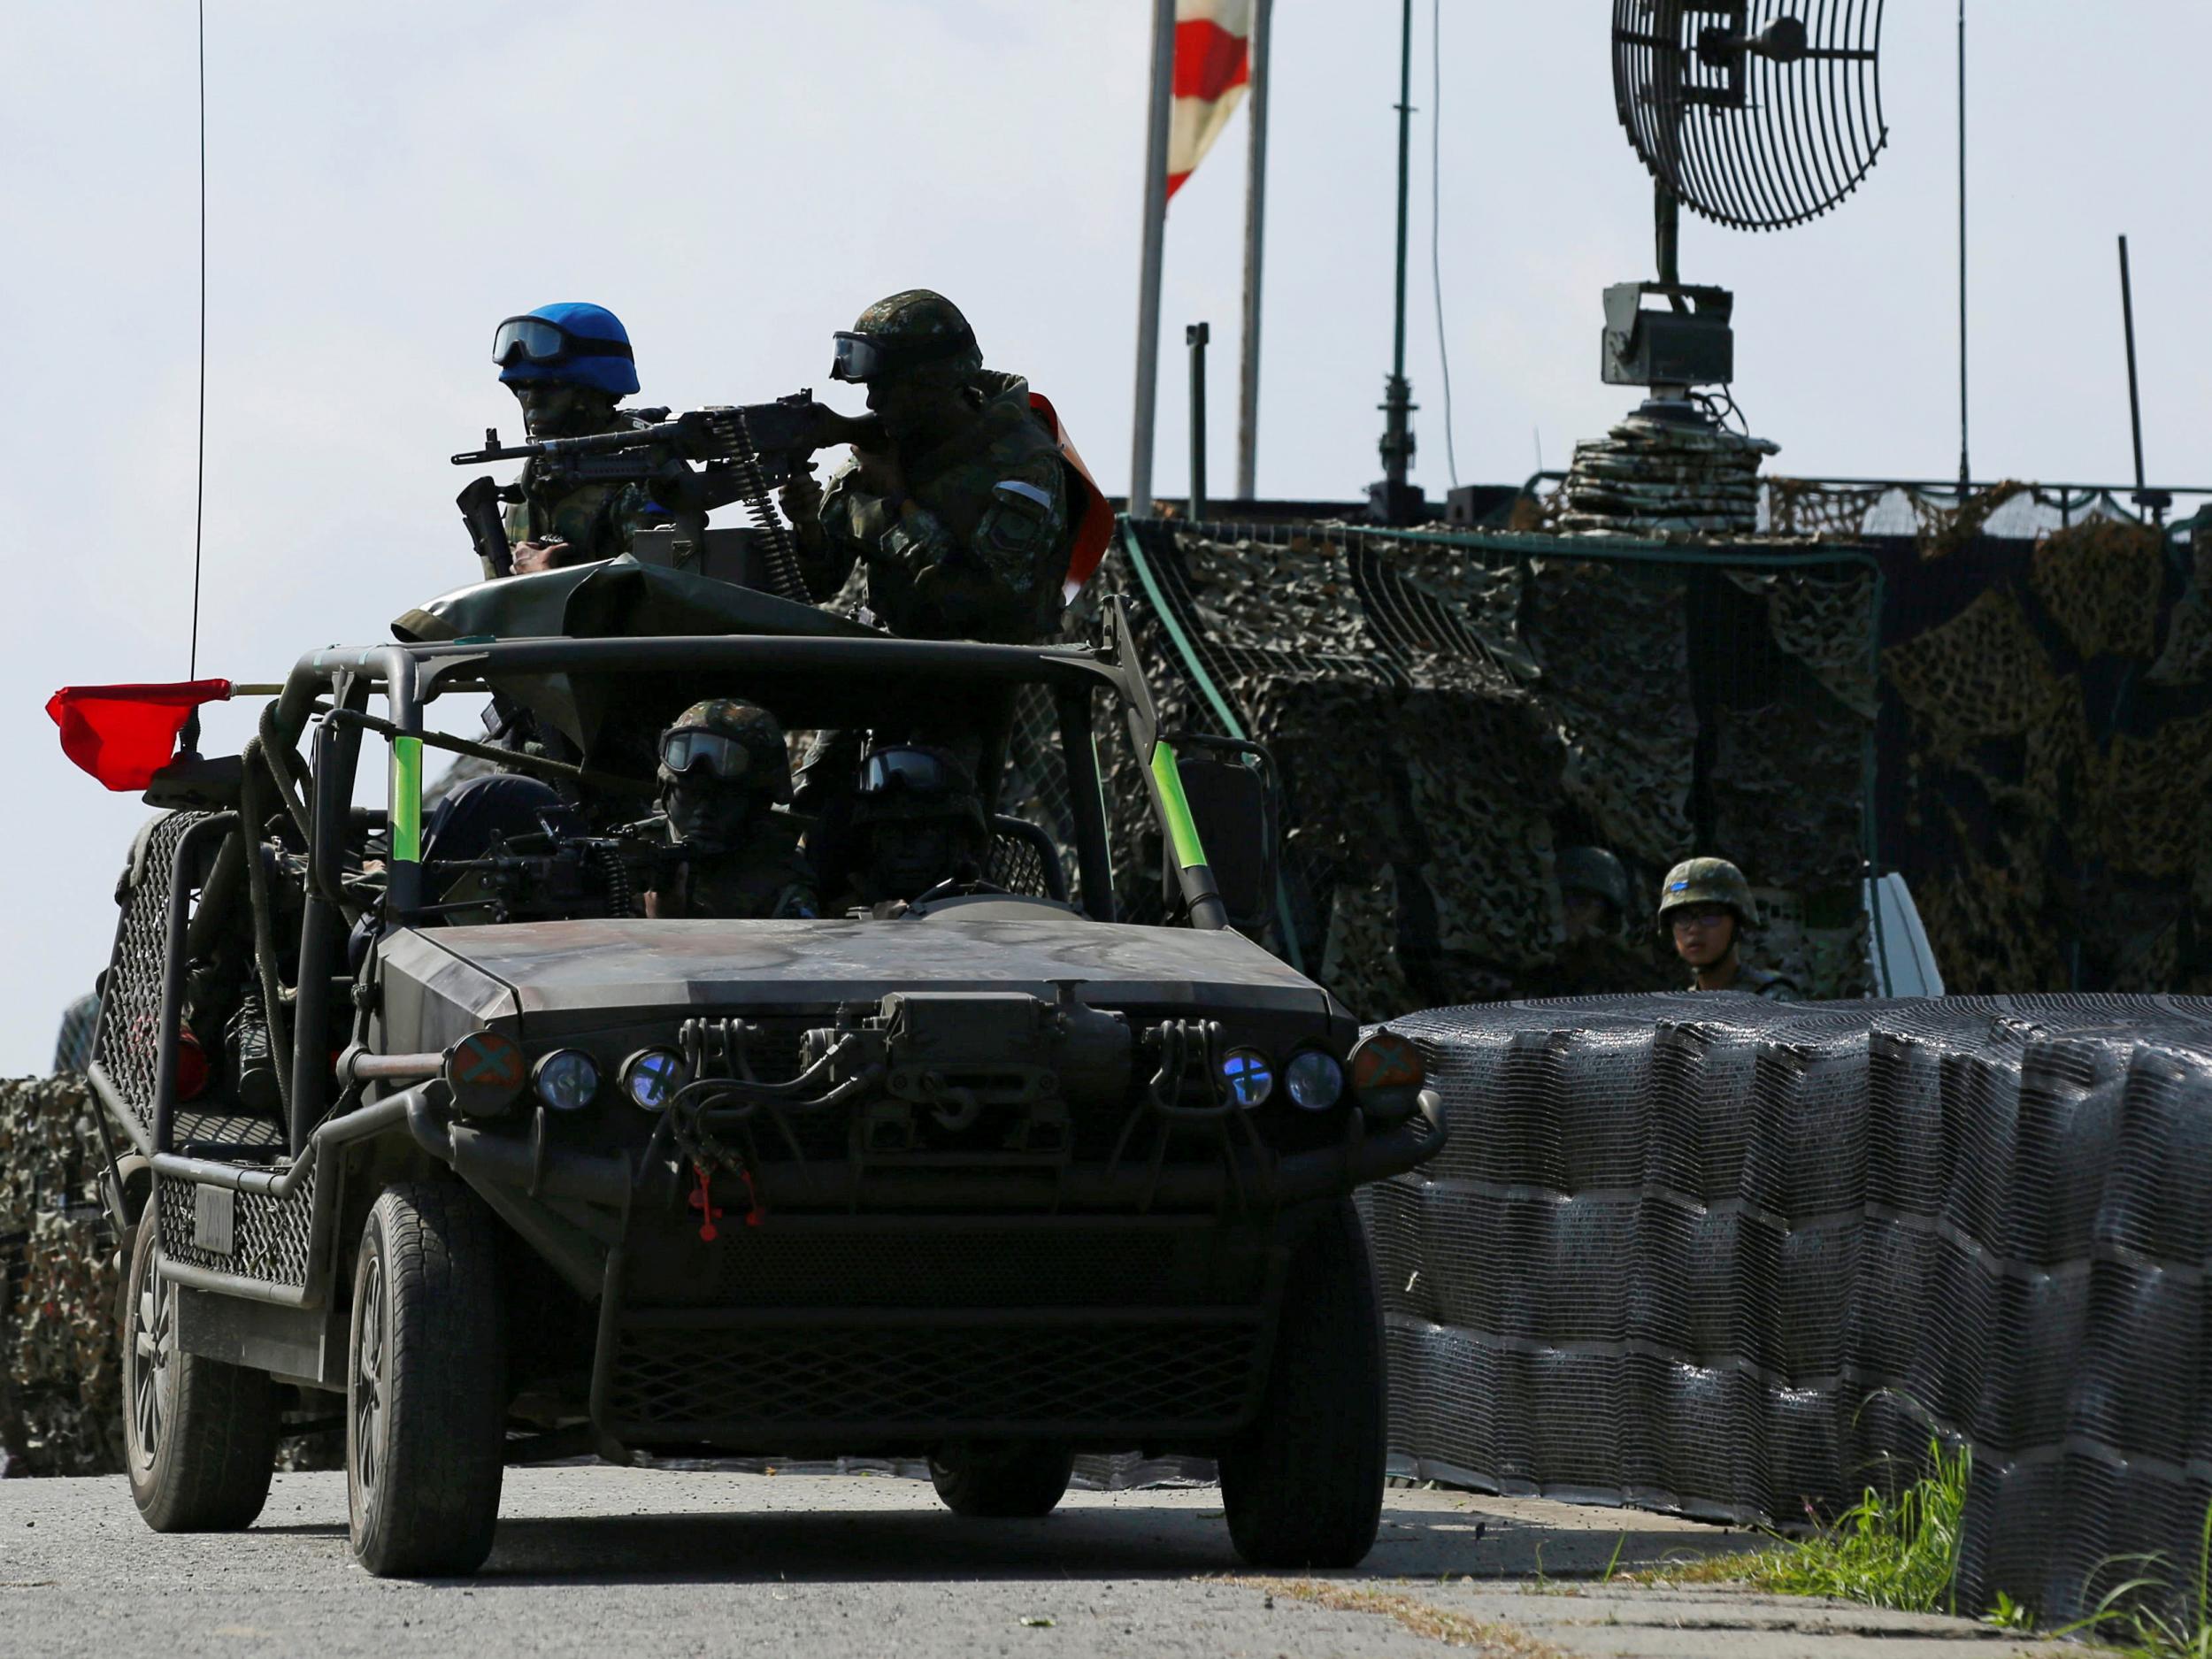 Military vehicle participating in drill simulating the China's People's Liberation Army invading Taiwan